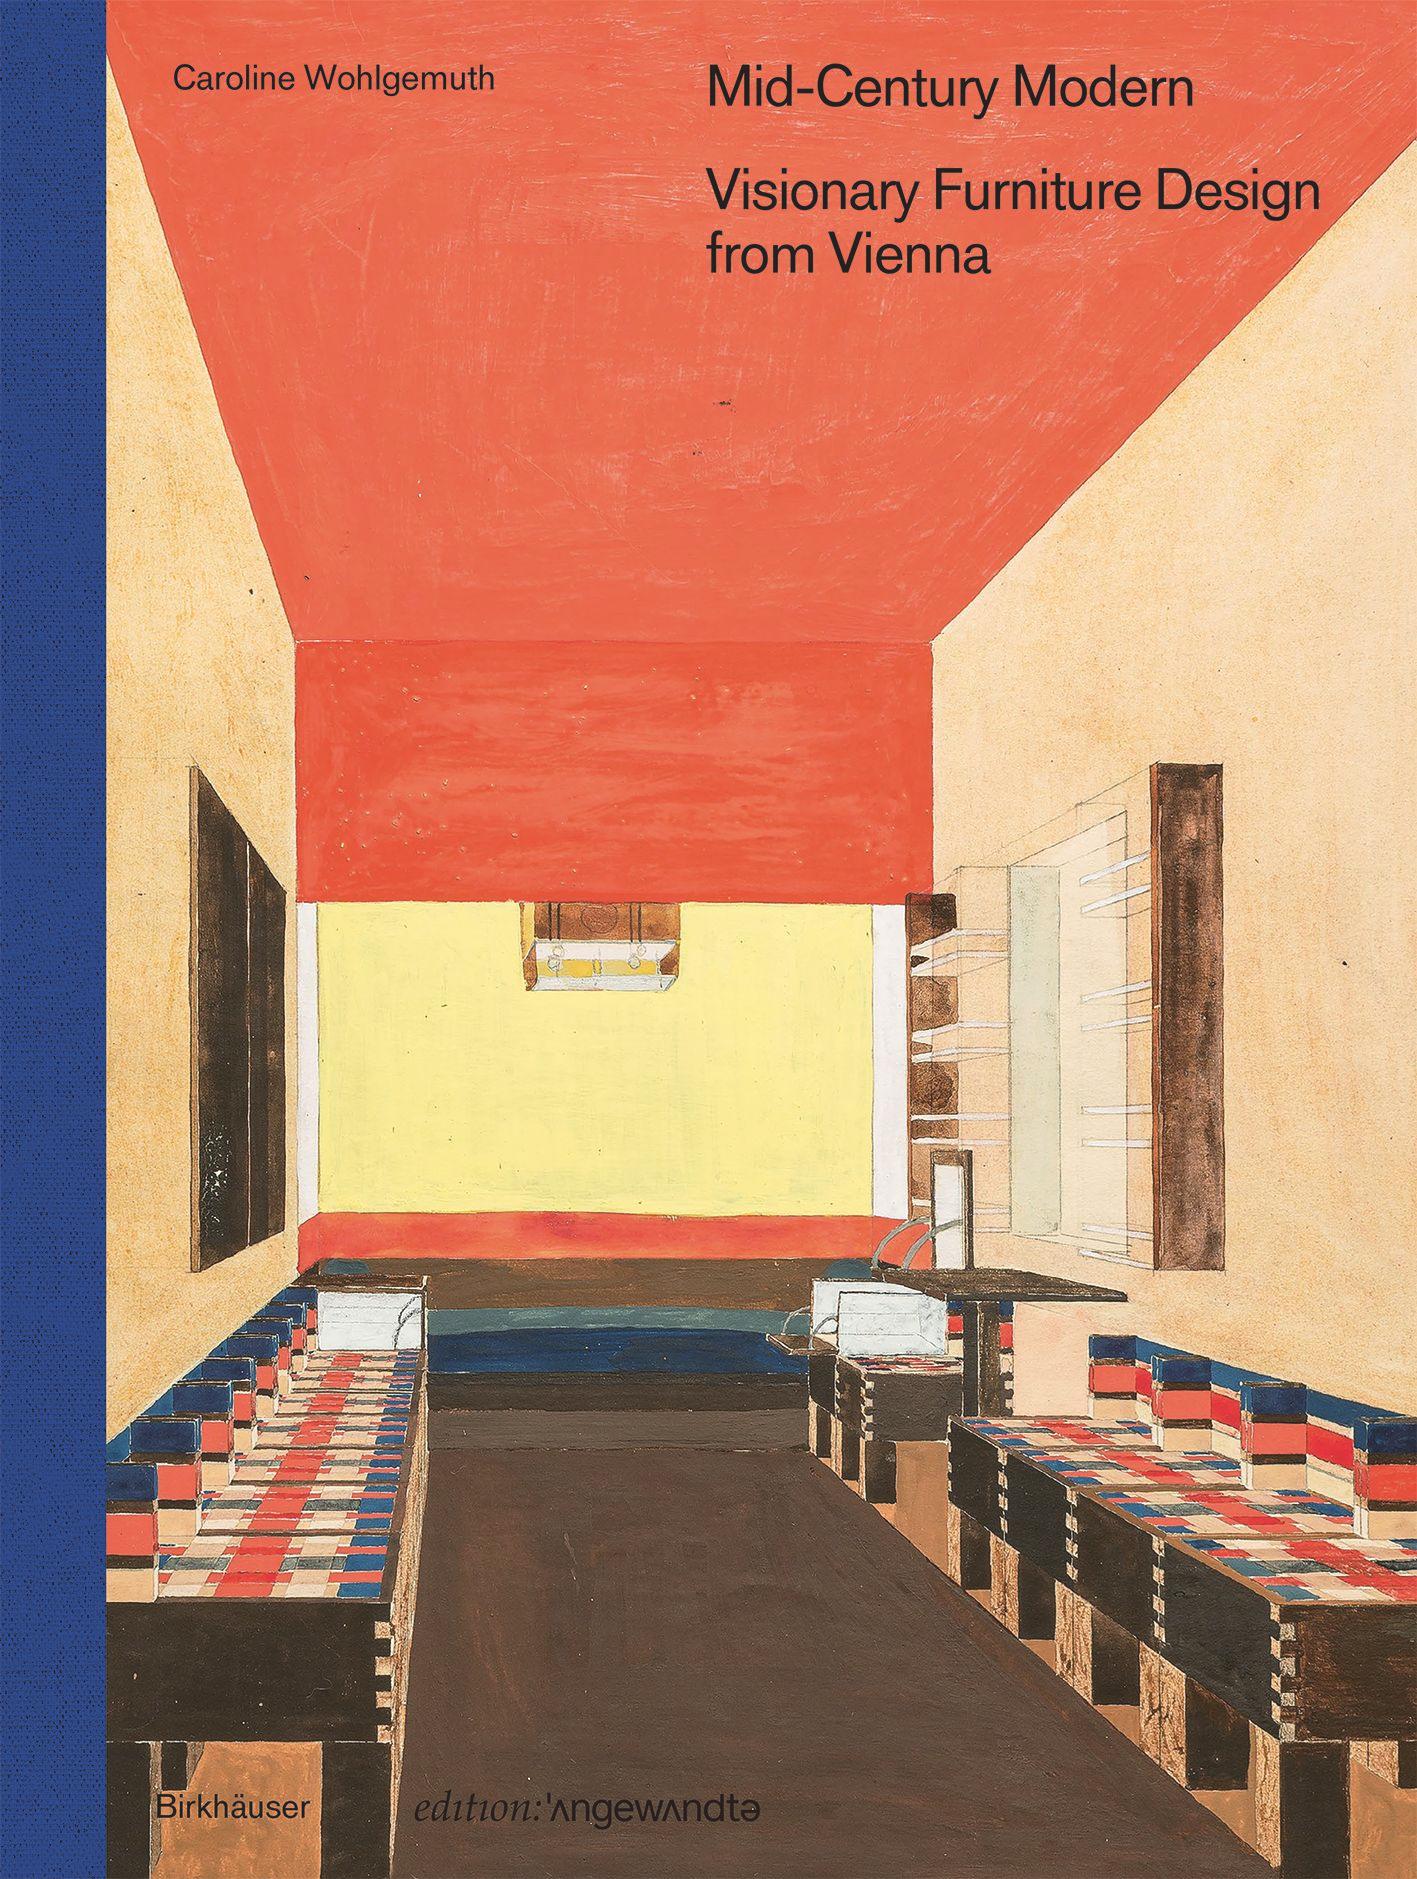 Mid-Century Modern – Visionary Furniture Design from Vienna's cover